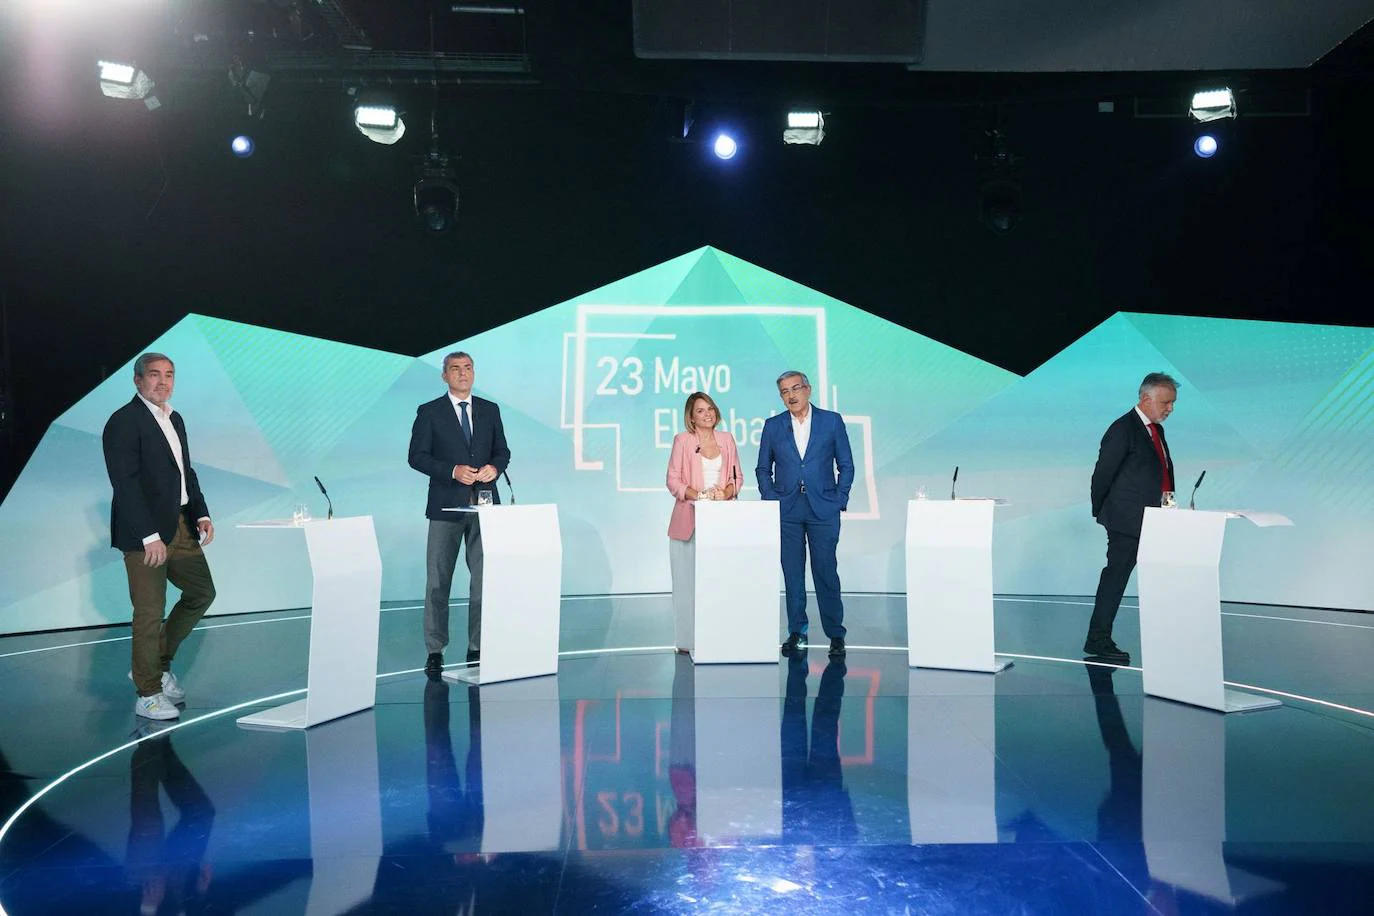 The candidate debate draws two blocks and leaves good news